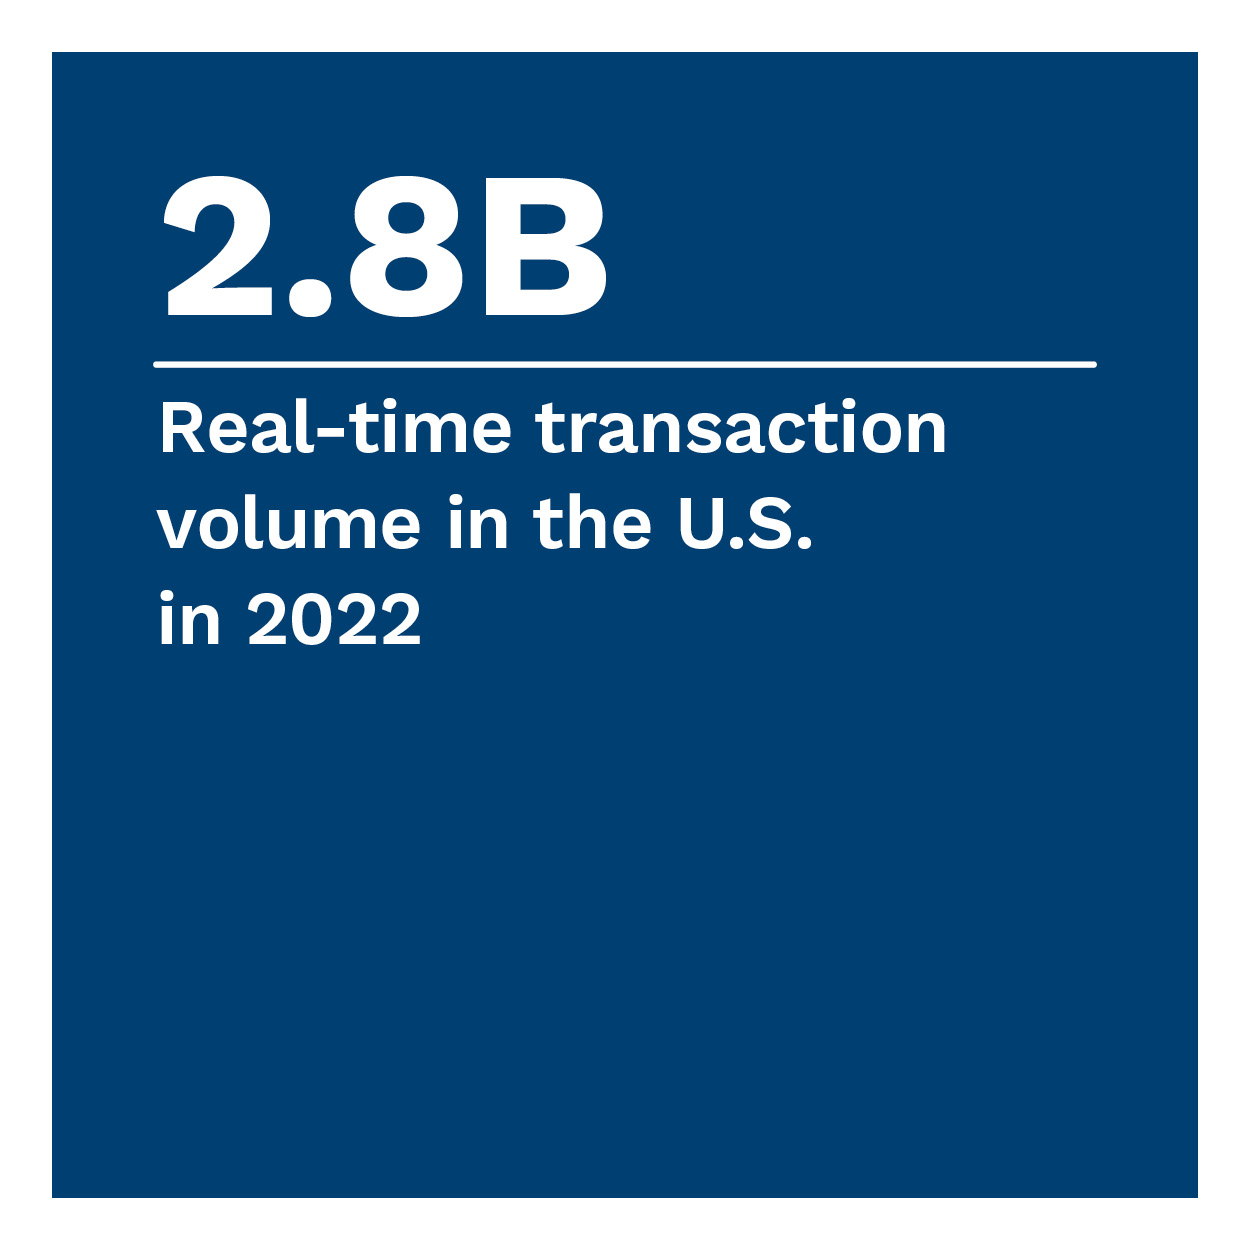 2.8B: Real-time transaction volume in the U.S. in 2022